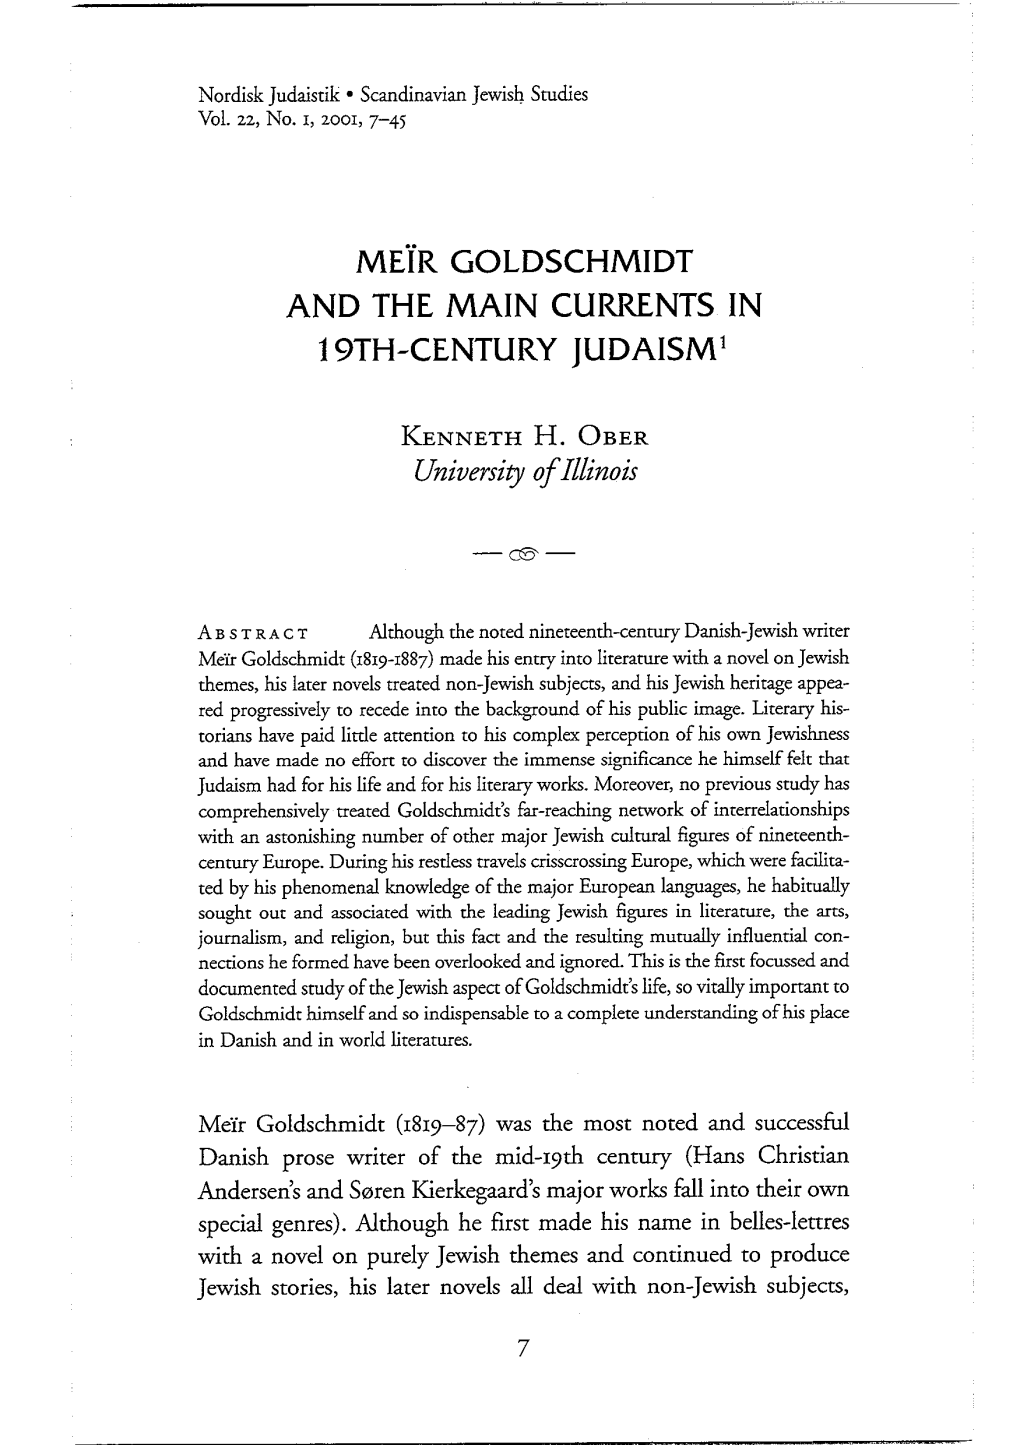 MEIR GOLDSCHMIDT and the MAIN CURRENTS in 19TH-CENTURY JUDAISM' University of Illinois